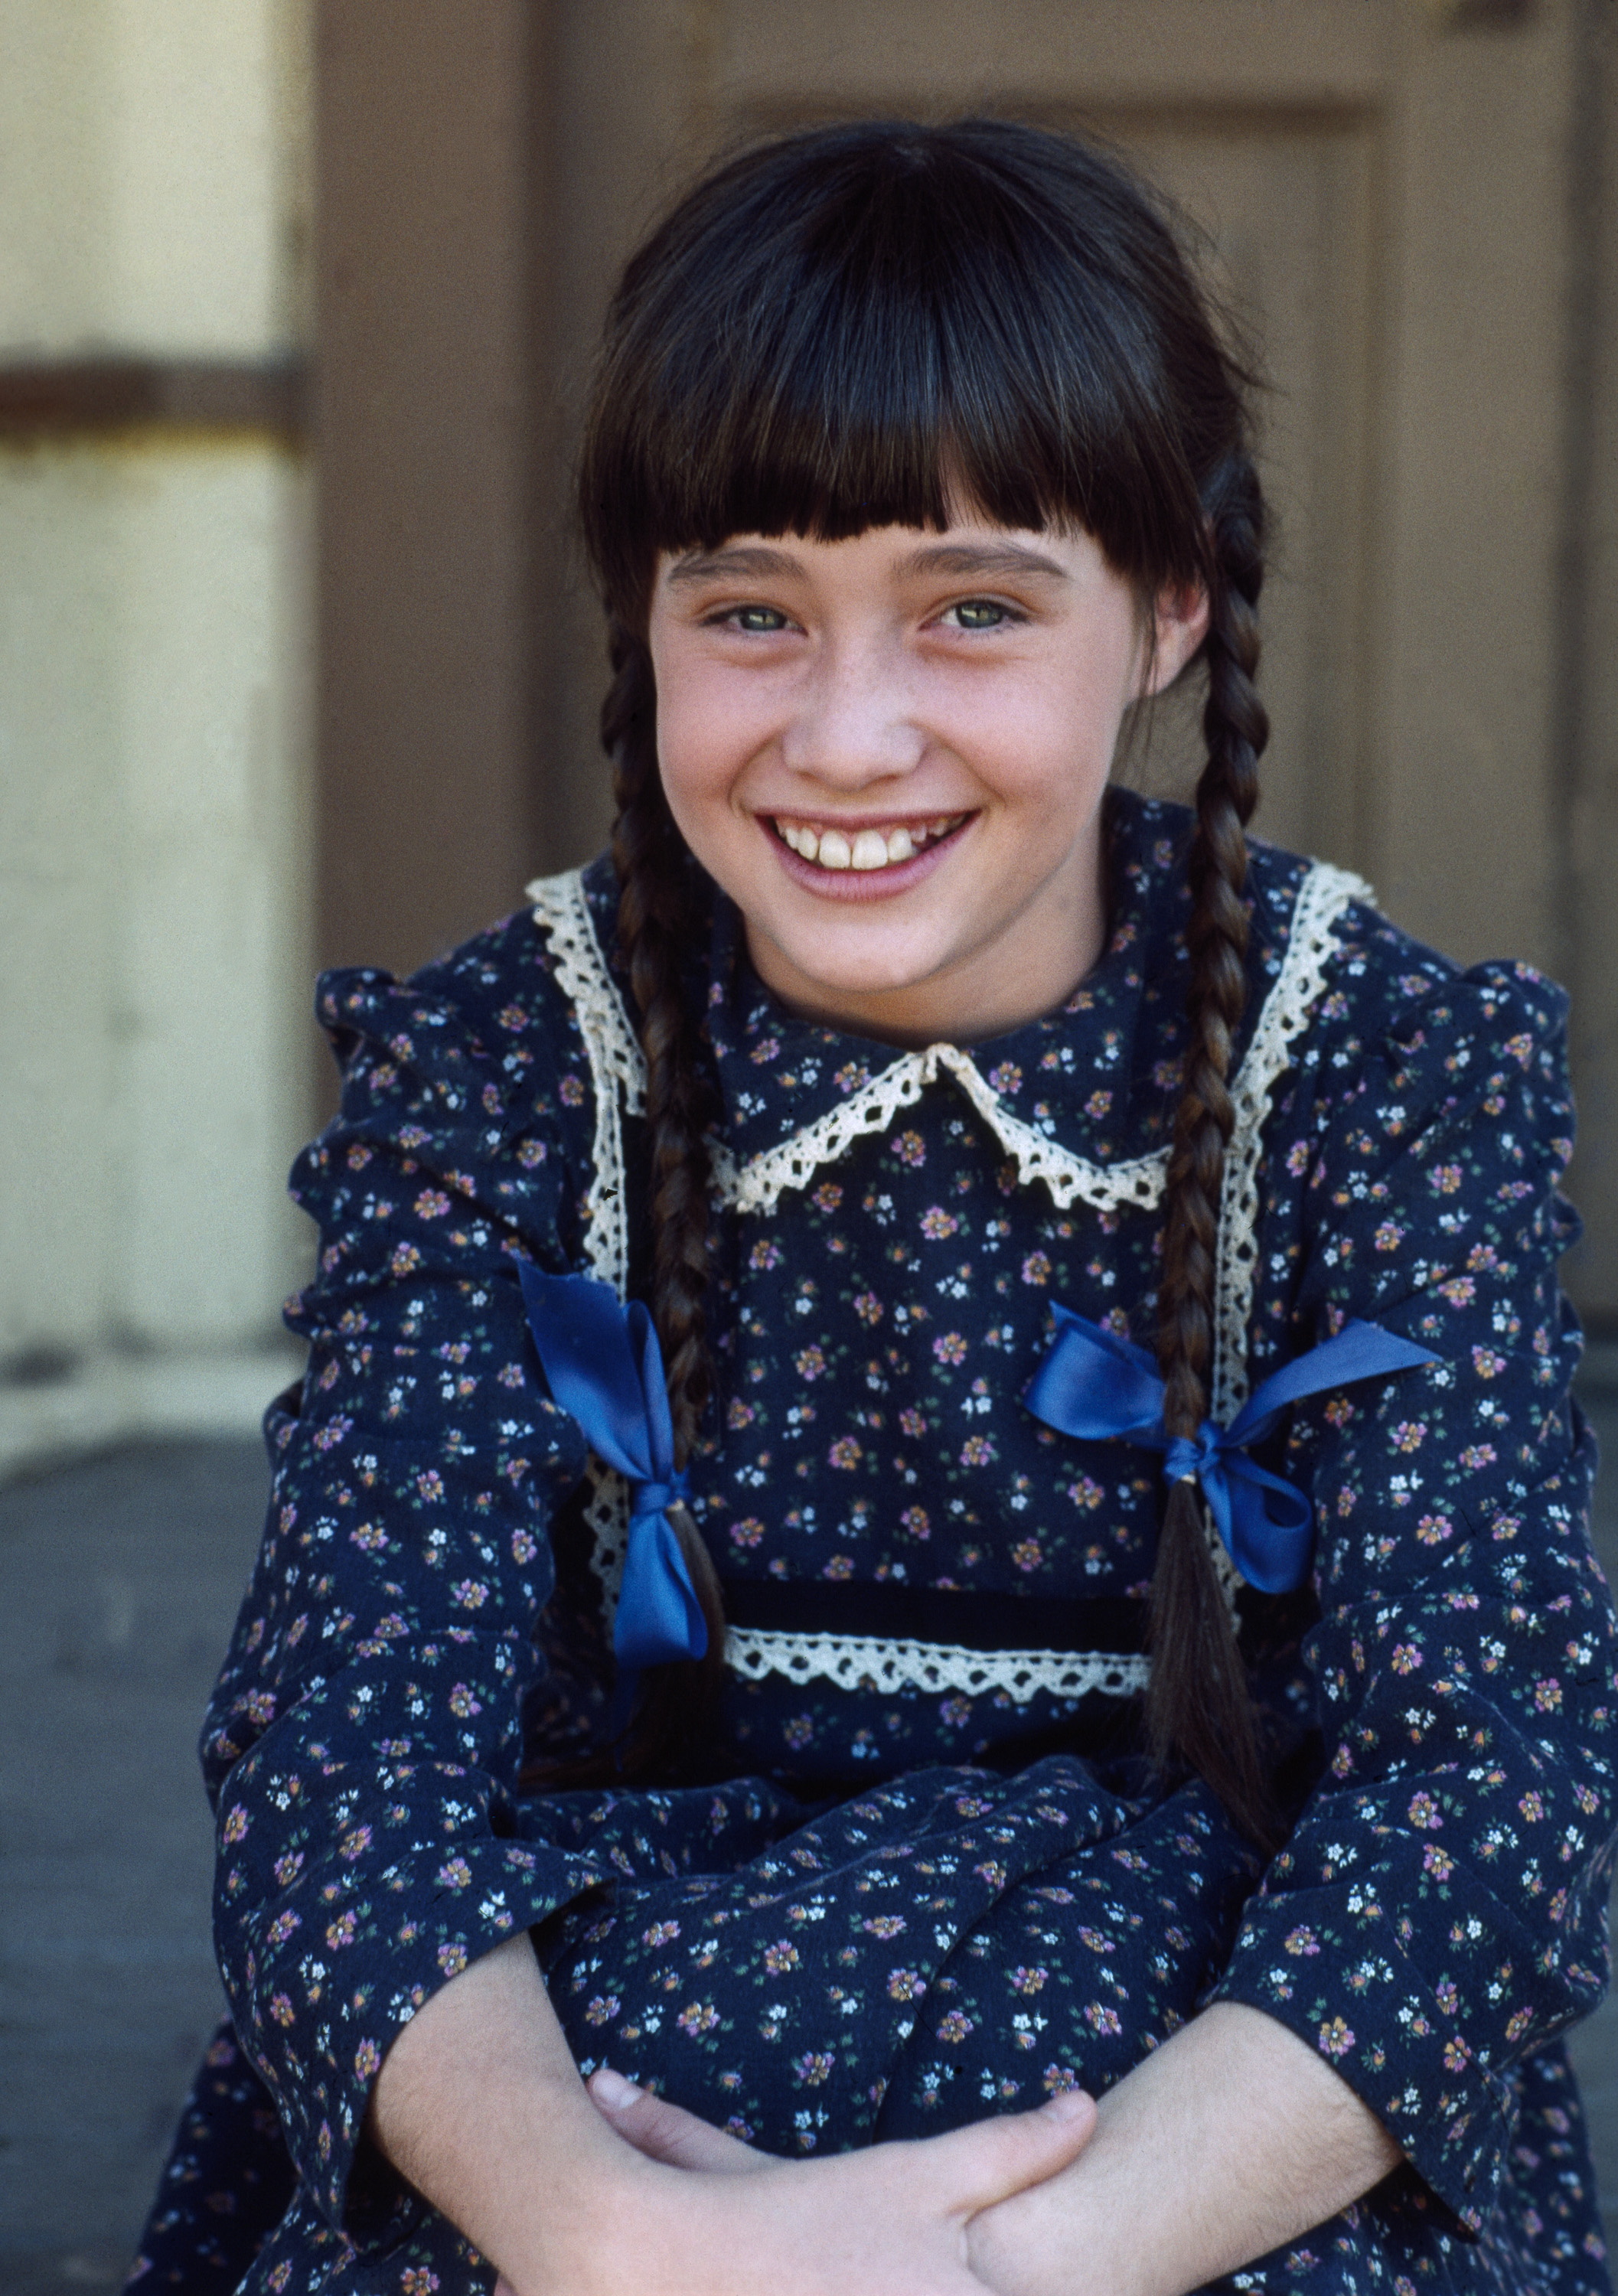 Shannen Doherty as Jenny Wilder on "Little House on the Prairie" in 1982. | Source: Getty Images